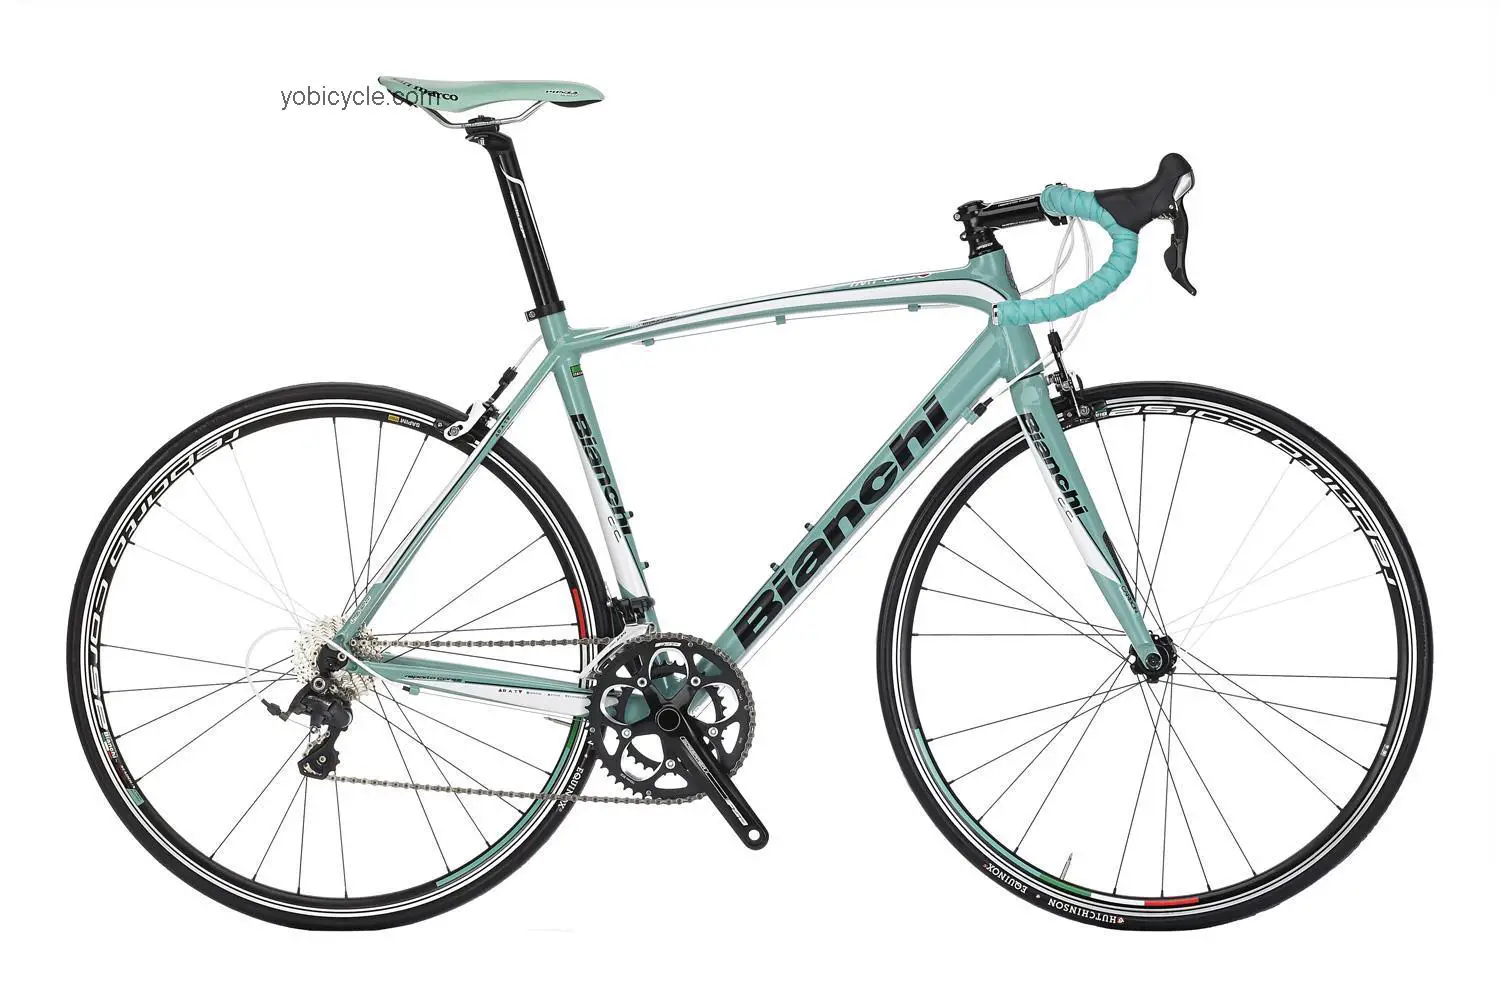 Bianchi Impulso Ultegra competitors and comparison tool online specs and performance